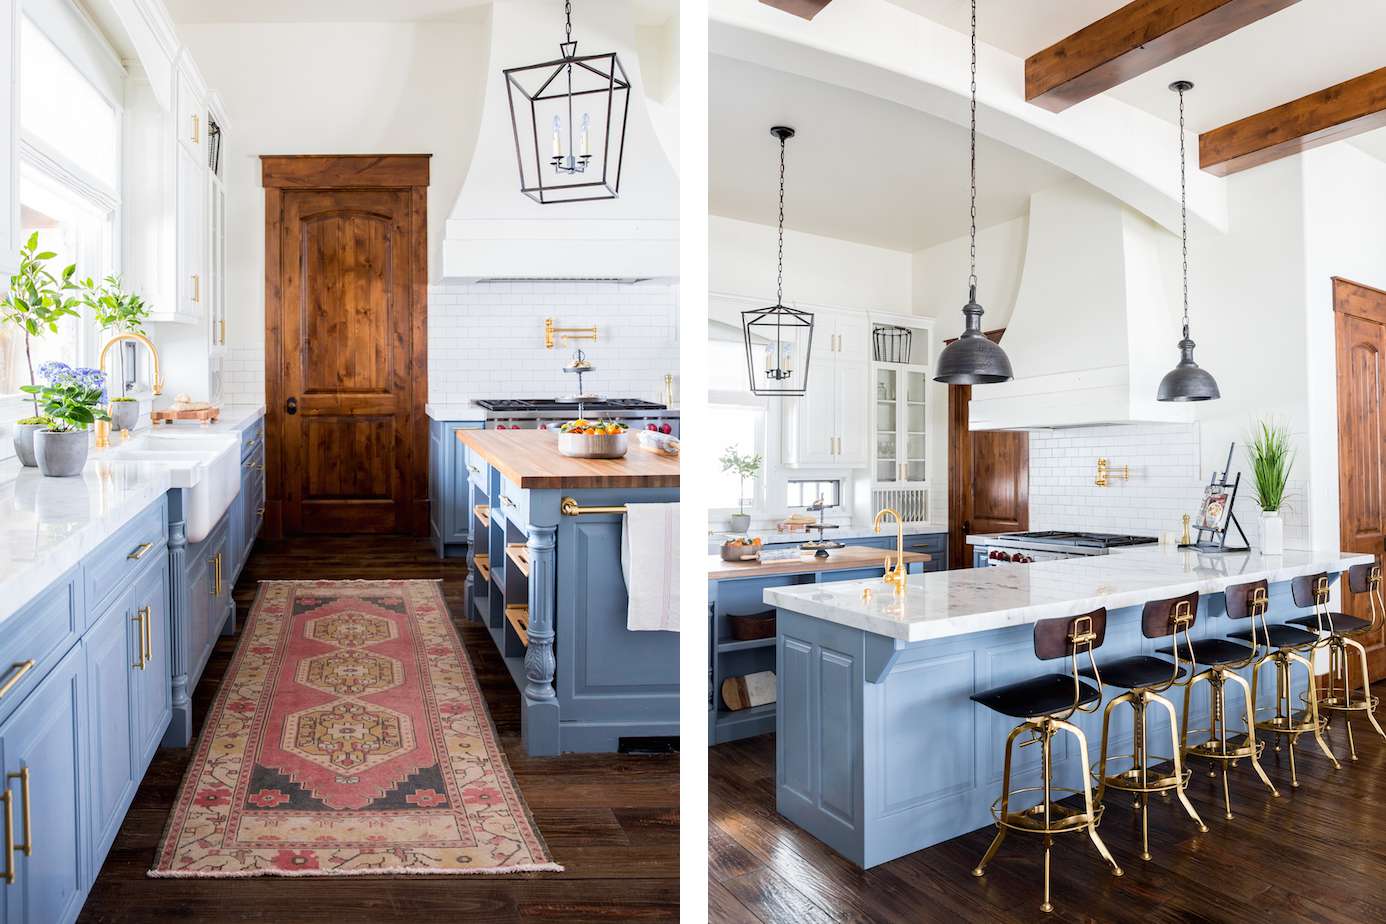 A farmhouse-style kitchen with dusty blue cabinets